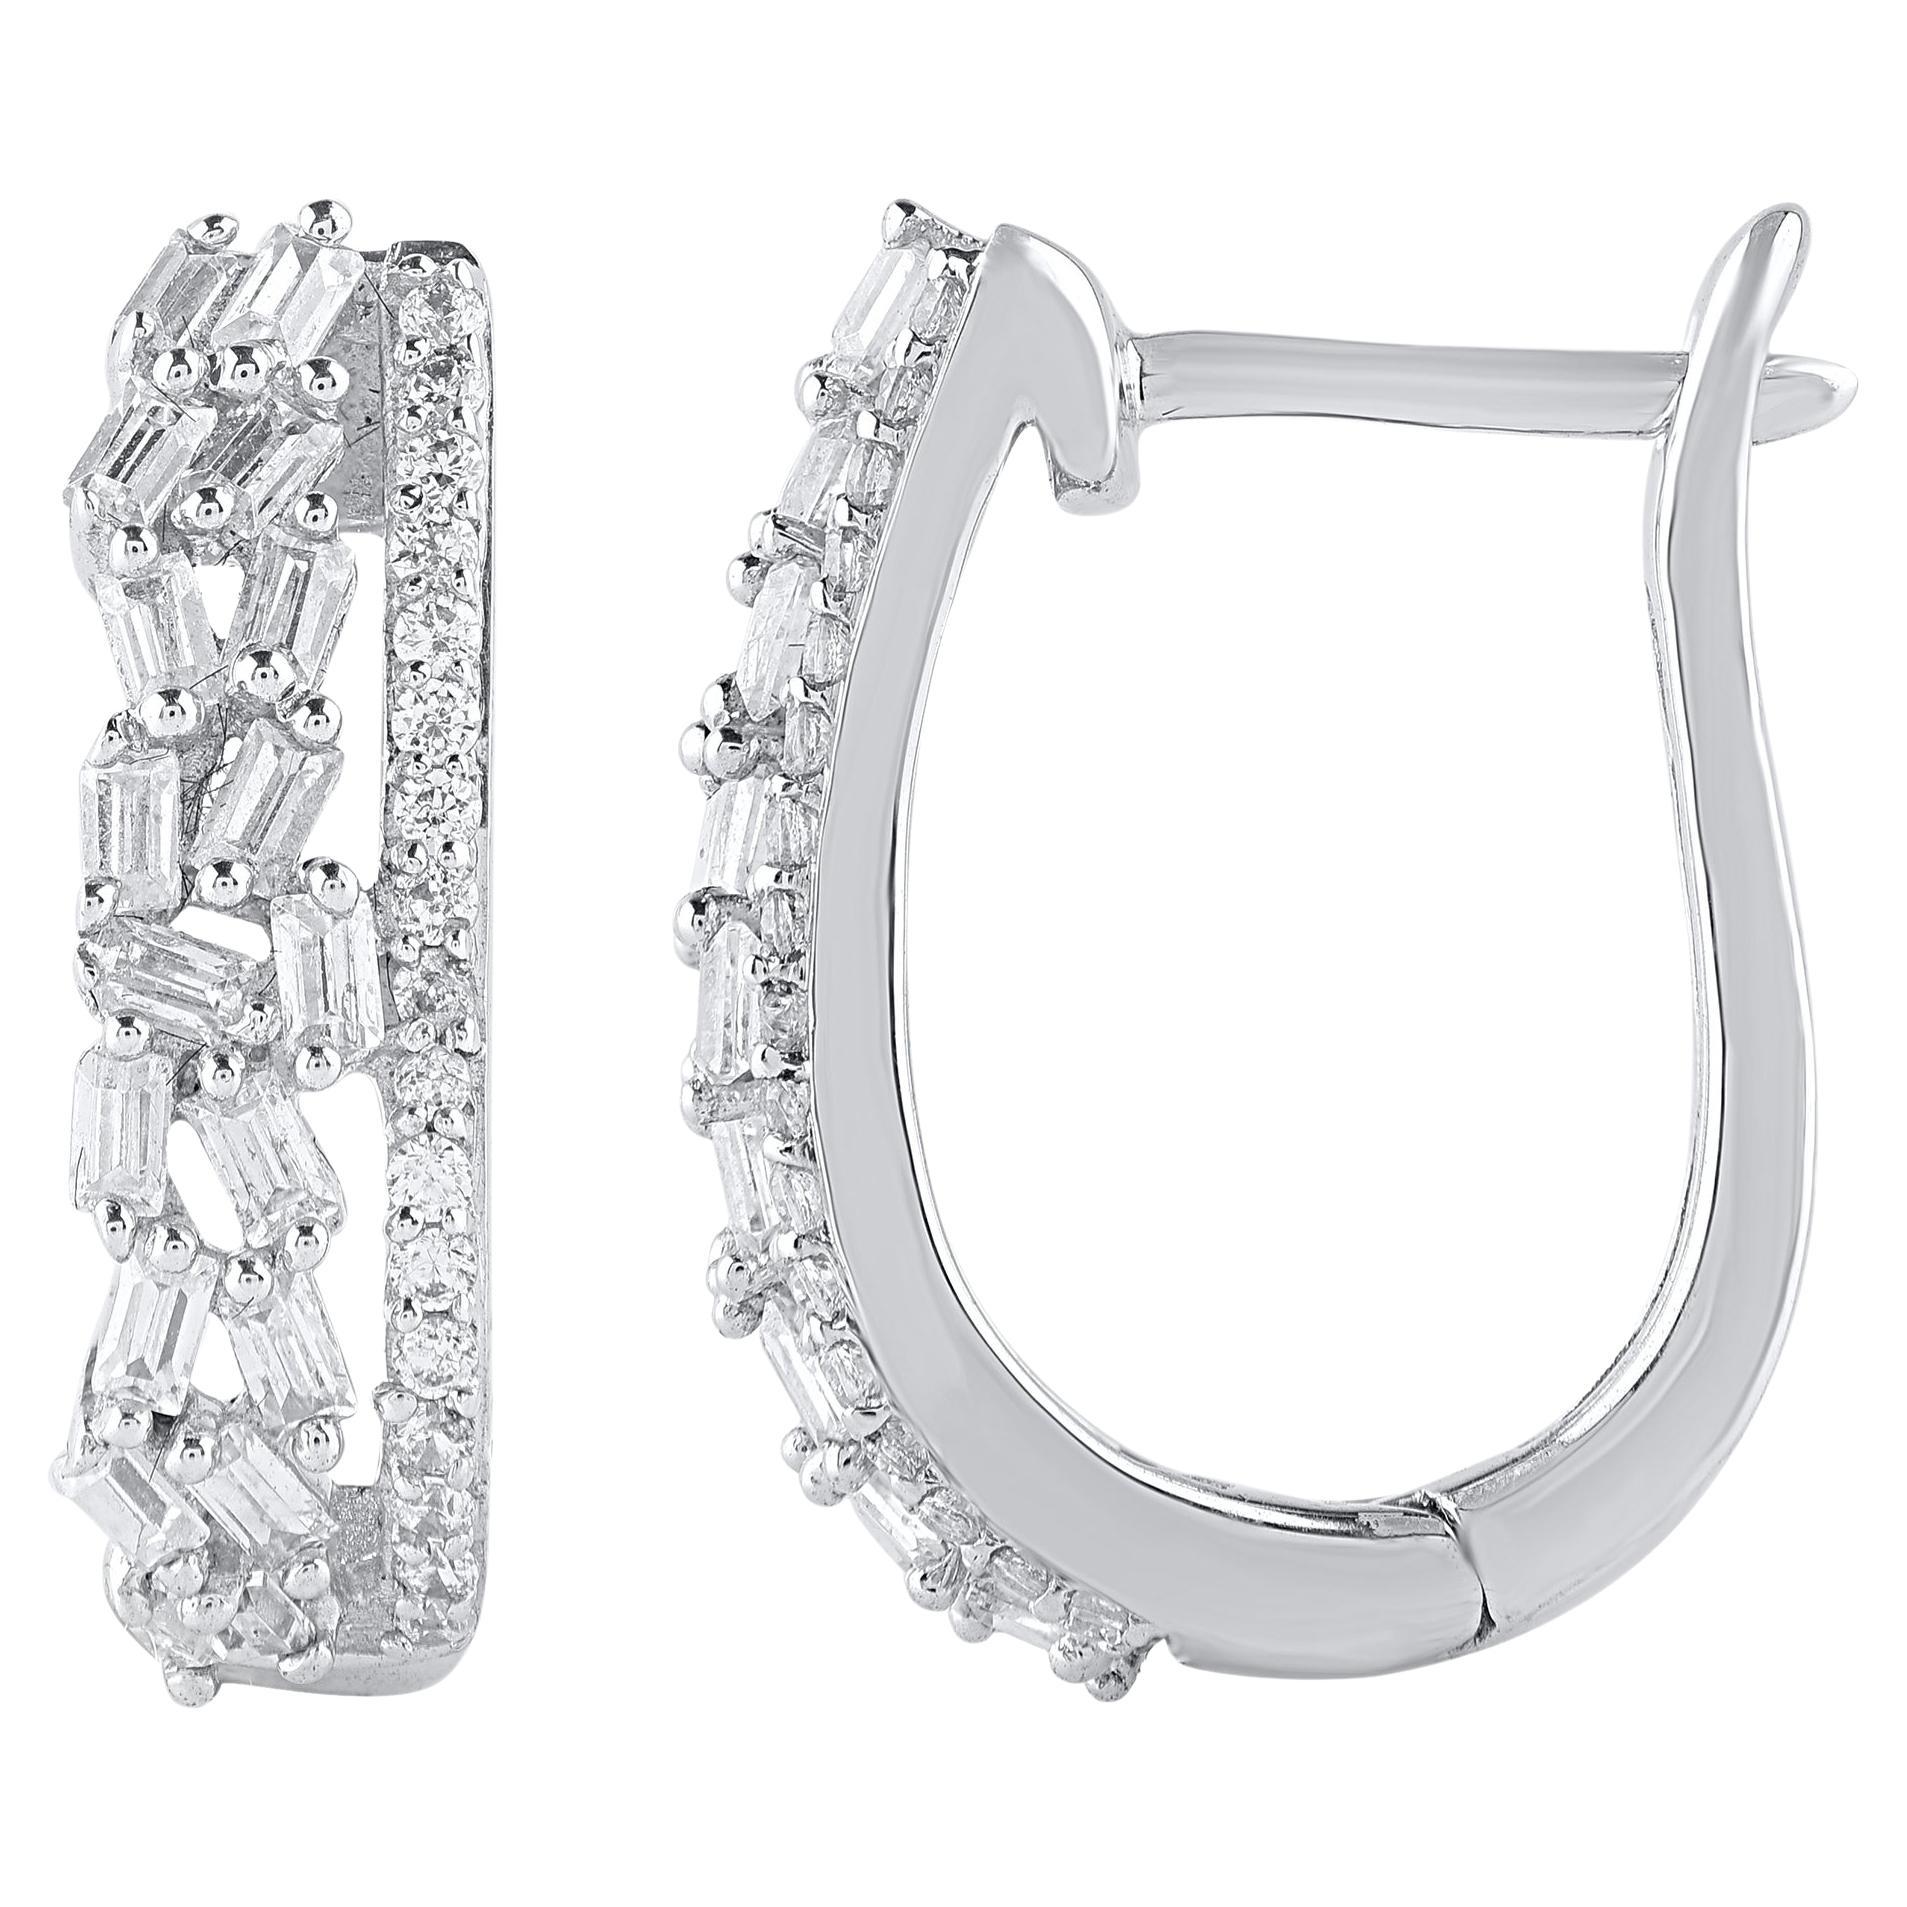 Bring charm to your look with this diamond hoop earrings. This earring is beautifully designed and studded with 70 single cut round diamond and baguette diamonds set in prong setting. We only use natural, 100% conflict free diamonds which shines in